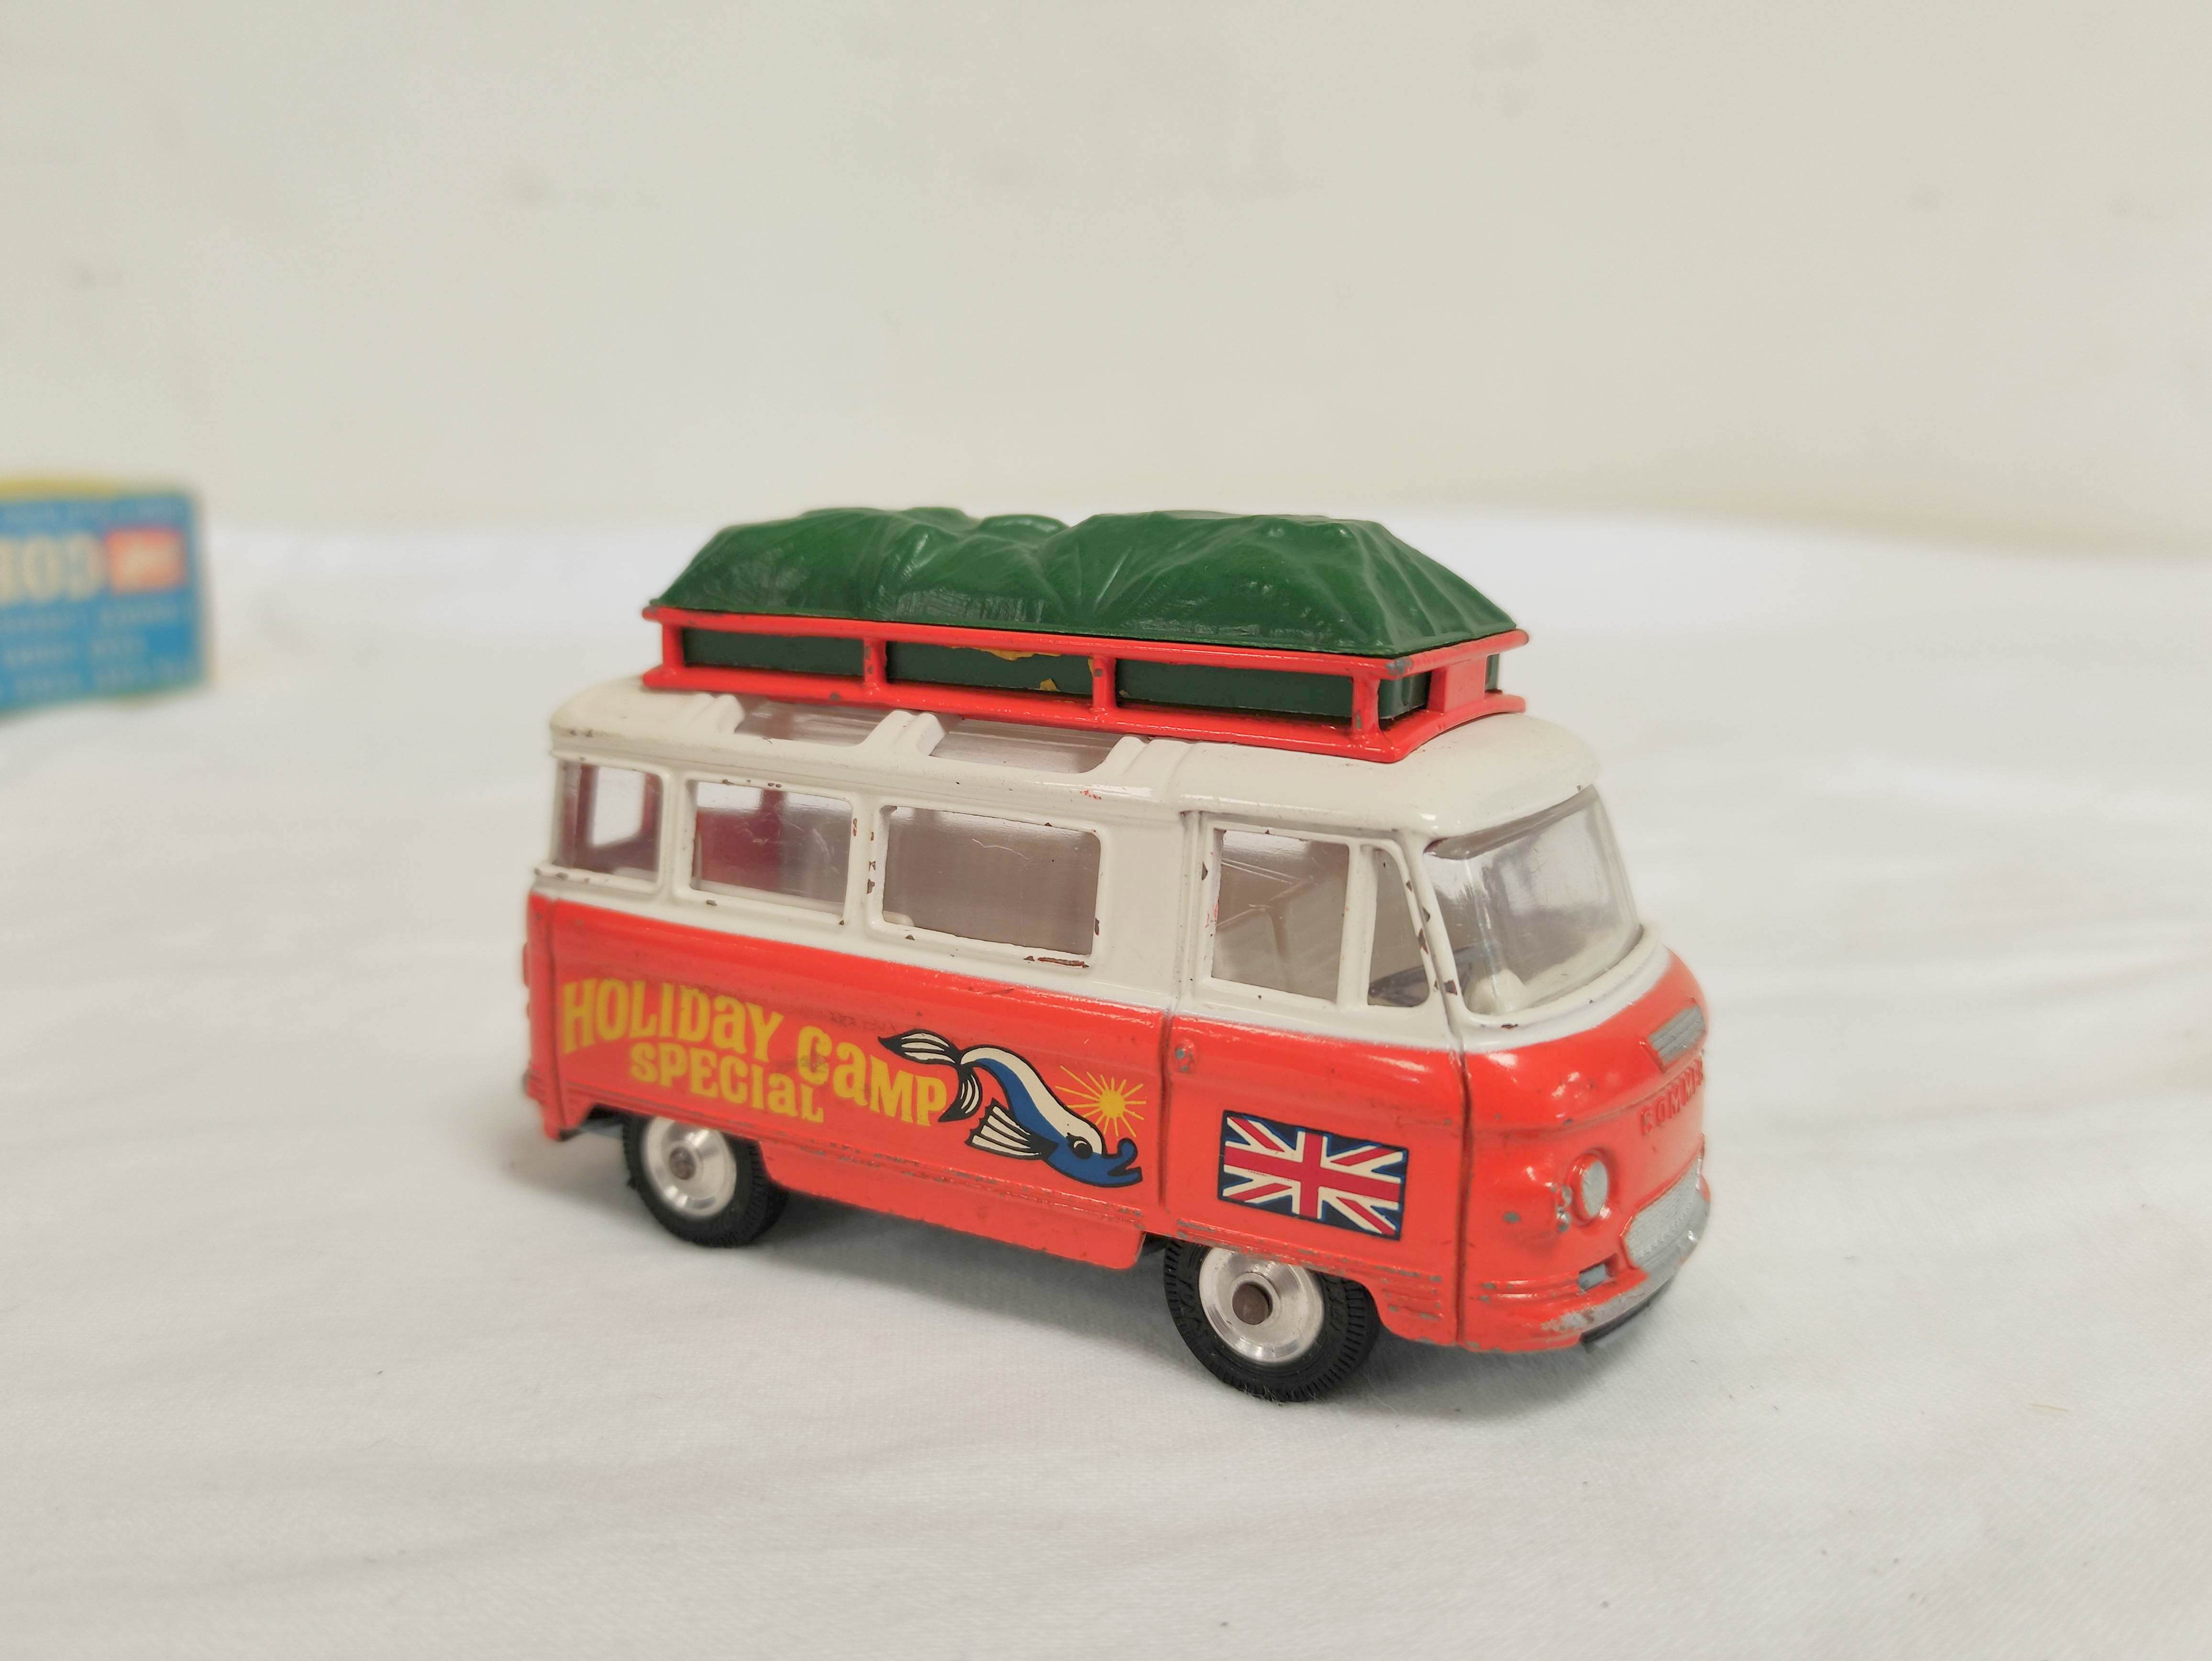 Corgi Toys- Boxed no 508 Holiday Camp Special Commer Bus 2500 series with orange and white body, - Image 3 of 7